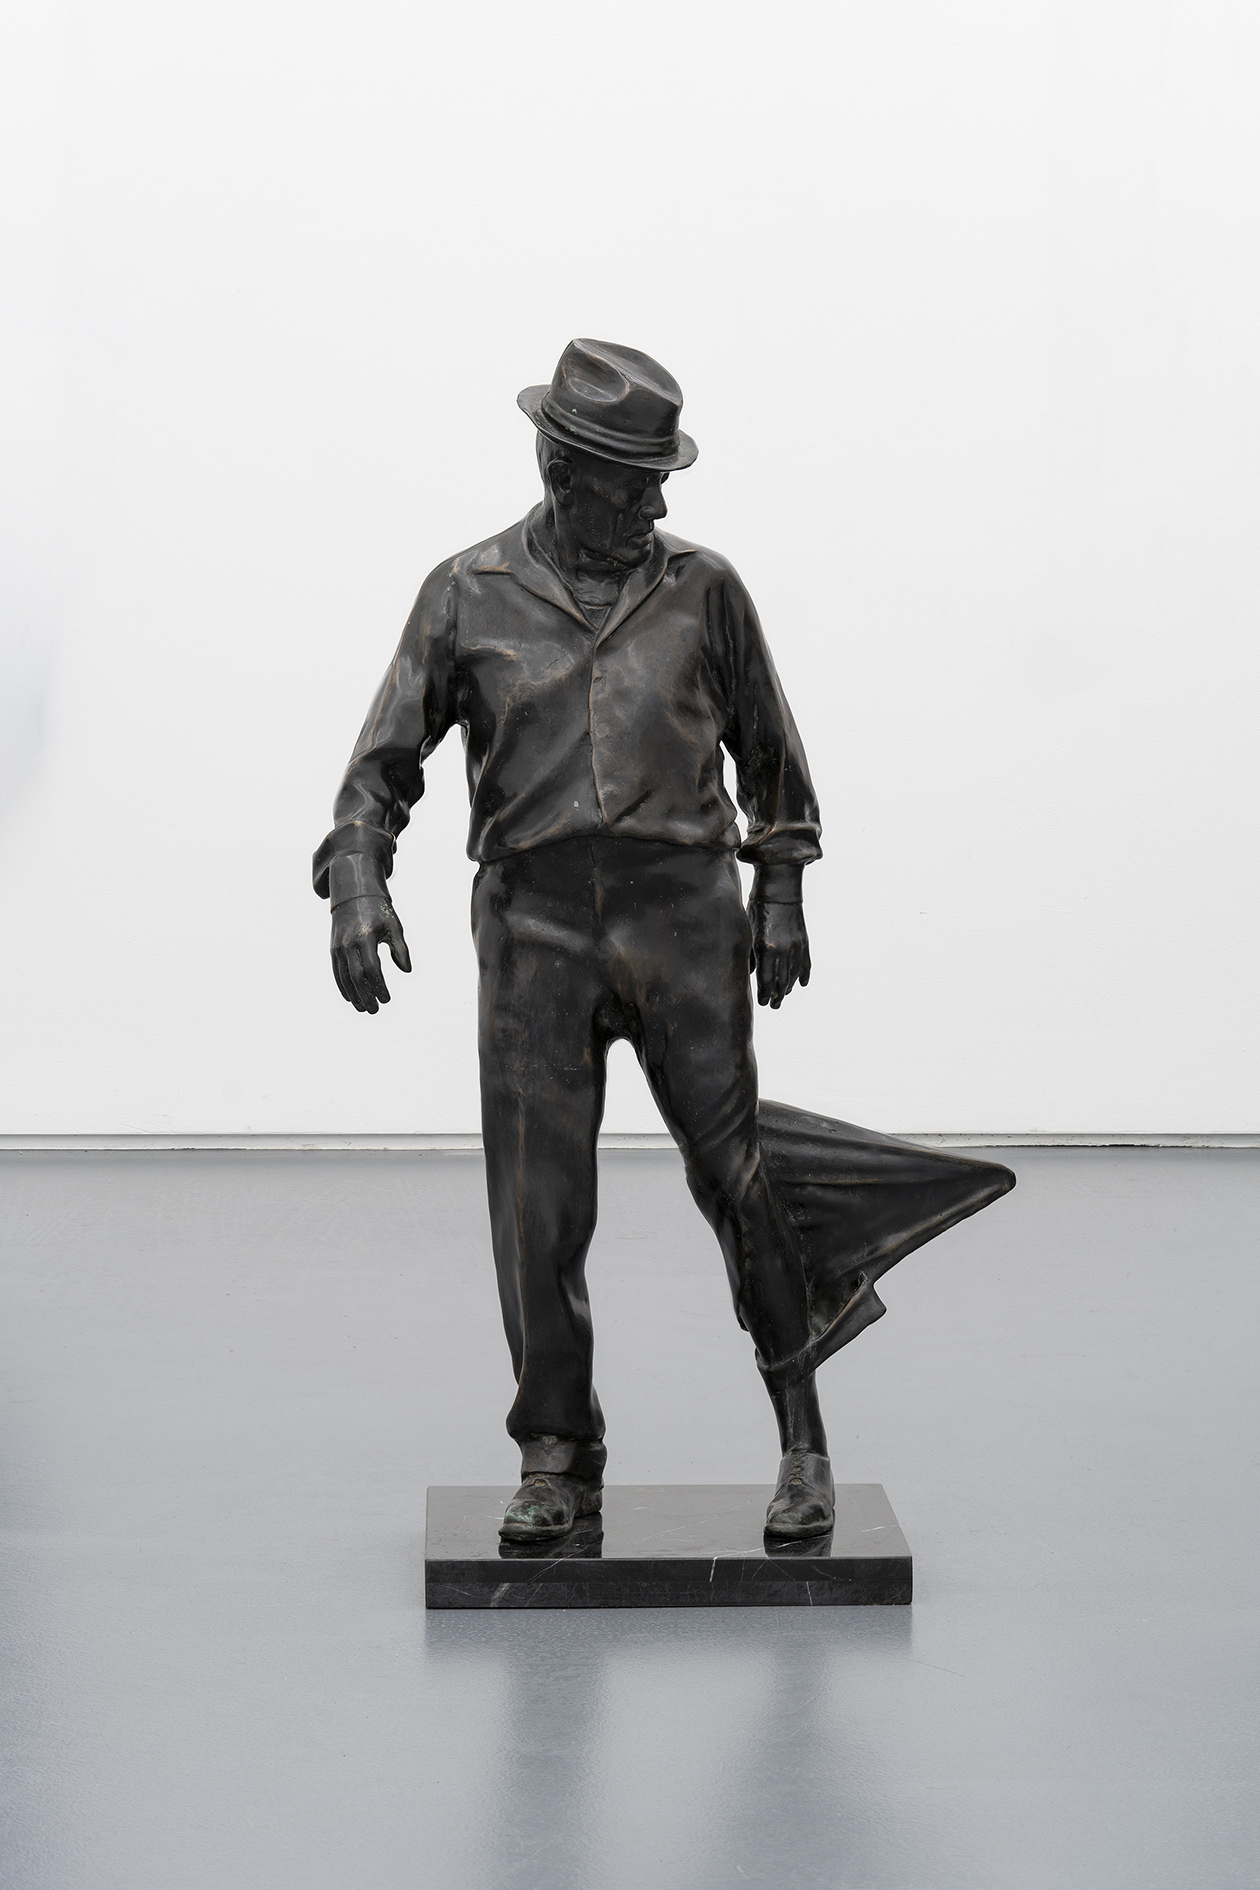 Ahmet Öğüt, While Other Attack (human figure), 2016 – Cast bronze, 100 x 93 x 76 cm. Courtesy the artist  and Mountains, Berlin.